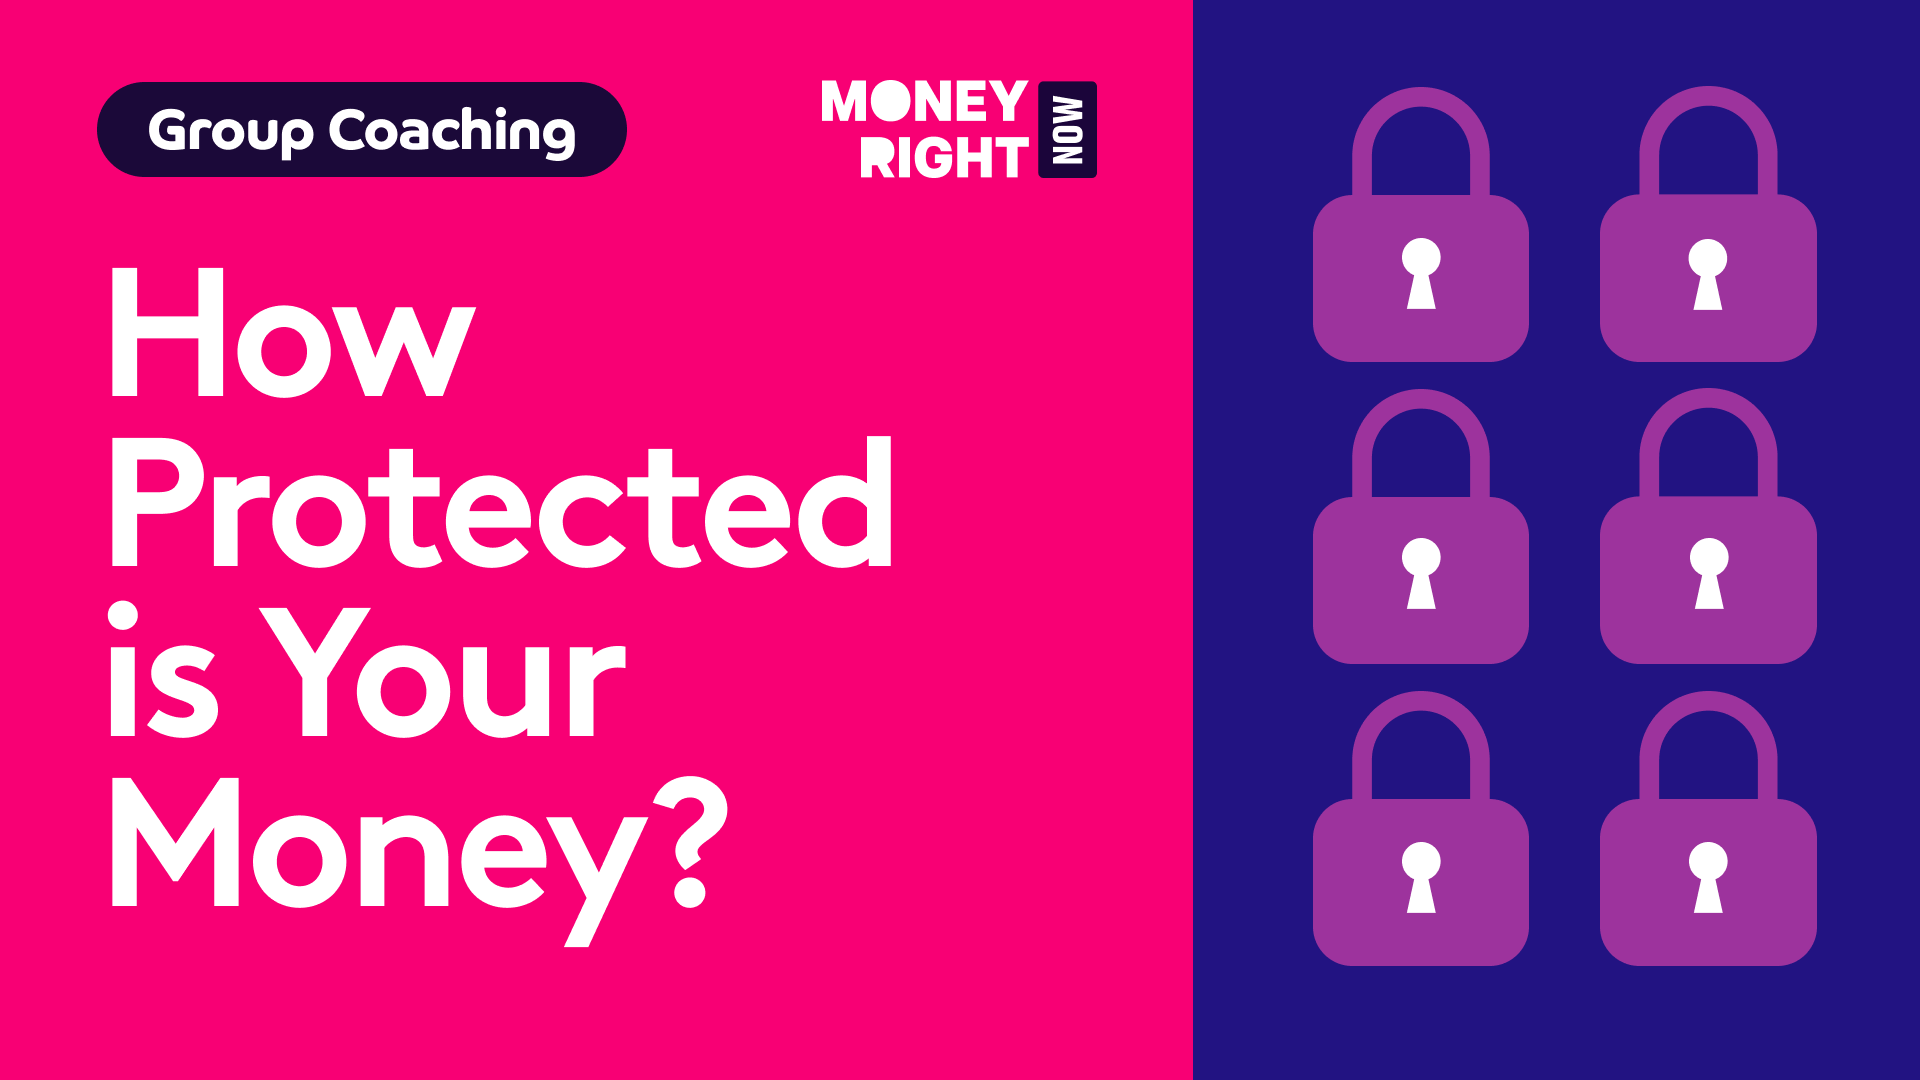 How Protected is Your Money?